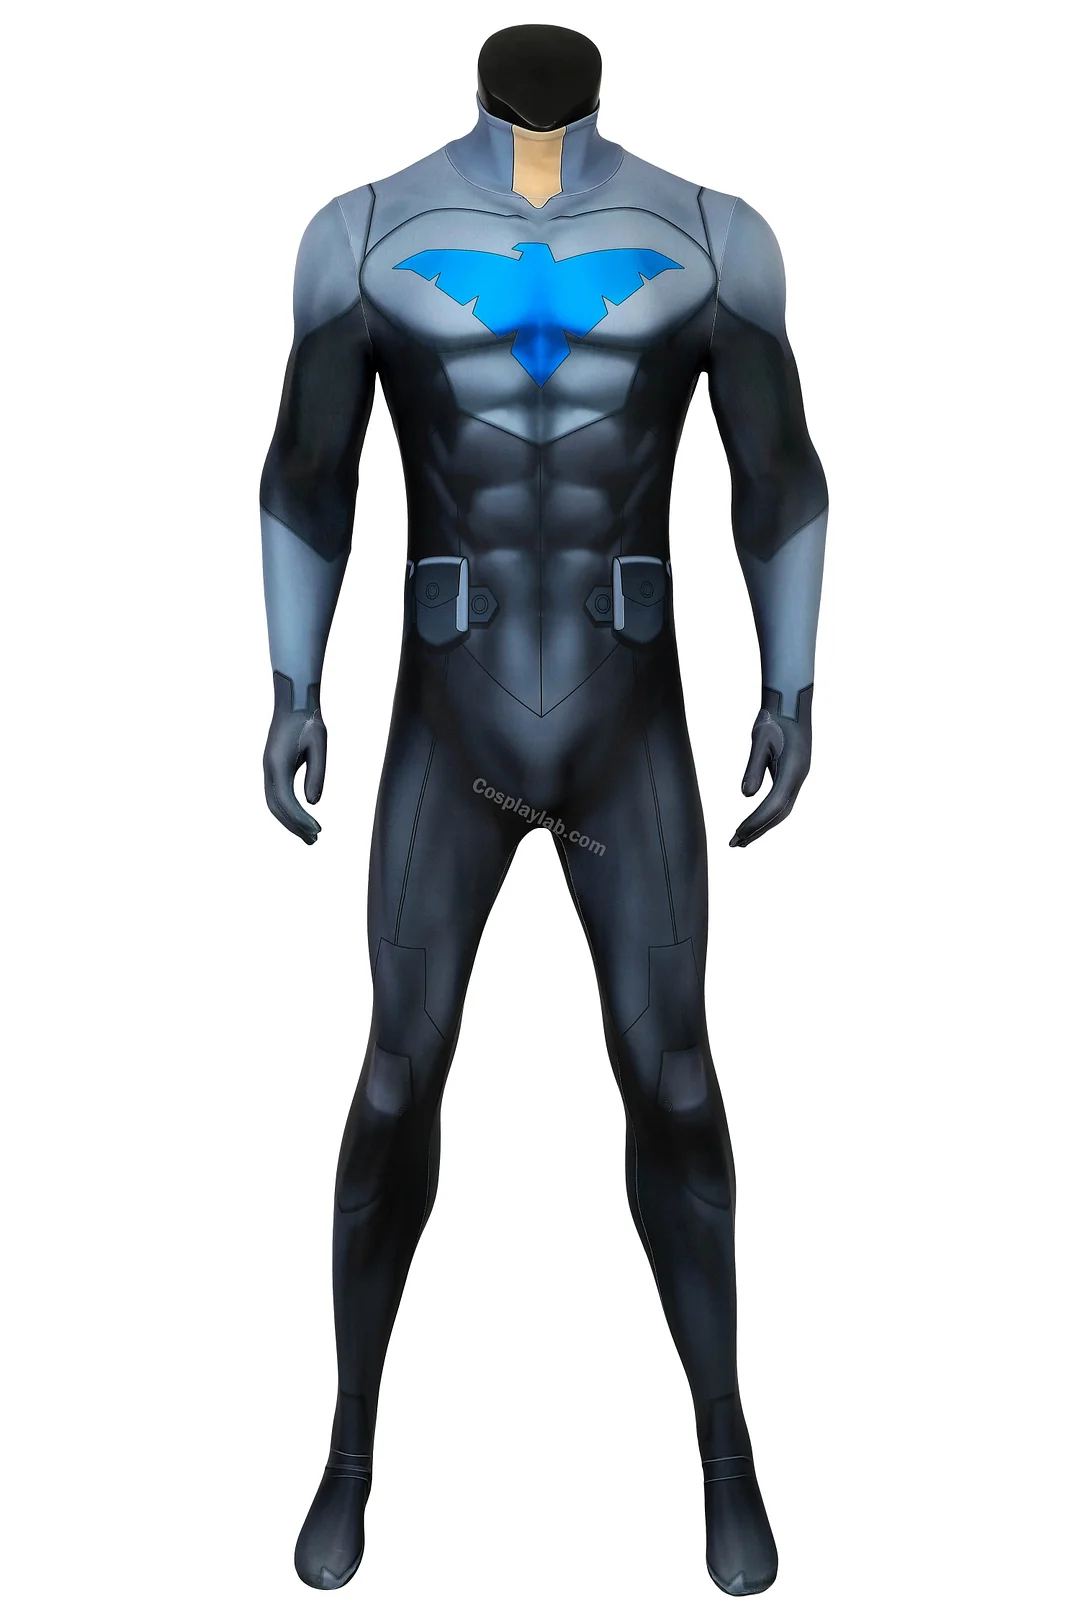 Nightwing Son of Batman Cosplay Costumes The 3D Printed Nightwing Spandex Suit By CosplayLab